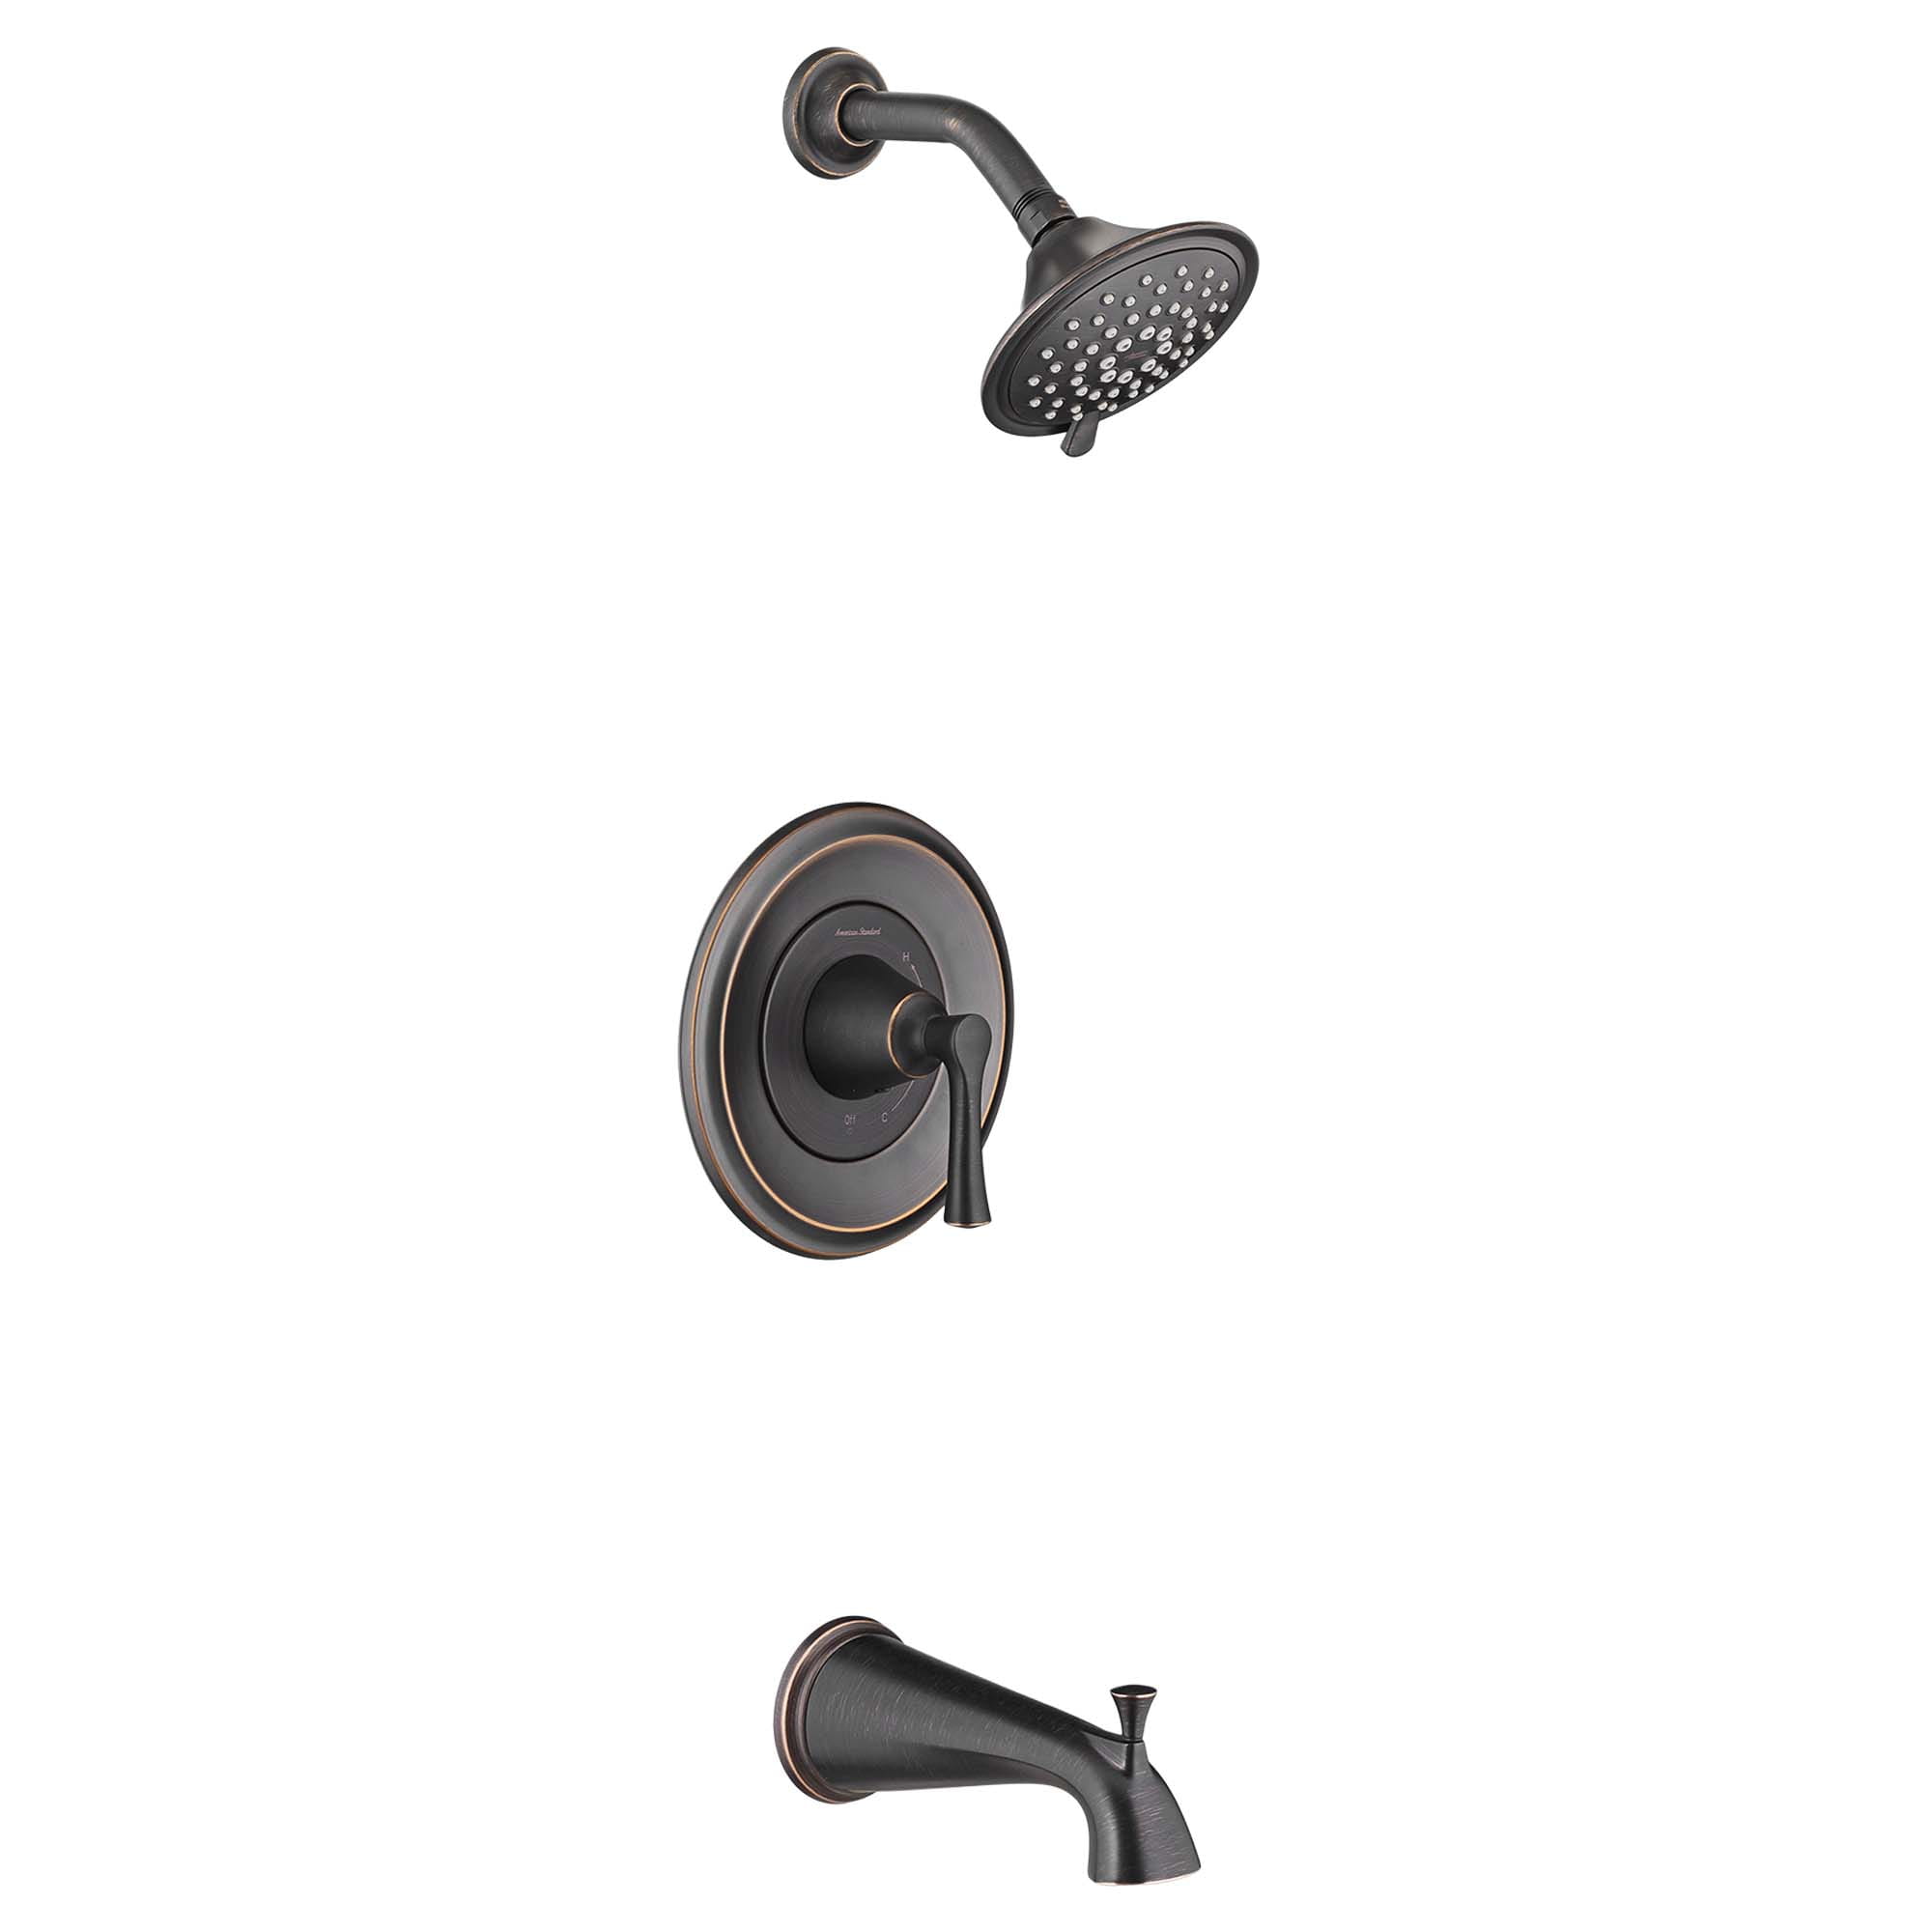 Estate 25 gpm 95 L min Tub and Shower Trim Kit With 3 Function Showerhead Double Ceramic Pressure Balance Cartridge With Lever Handle LEGACY BRONZE